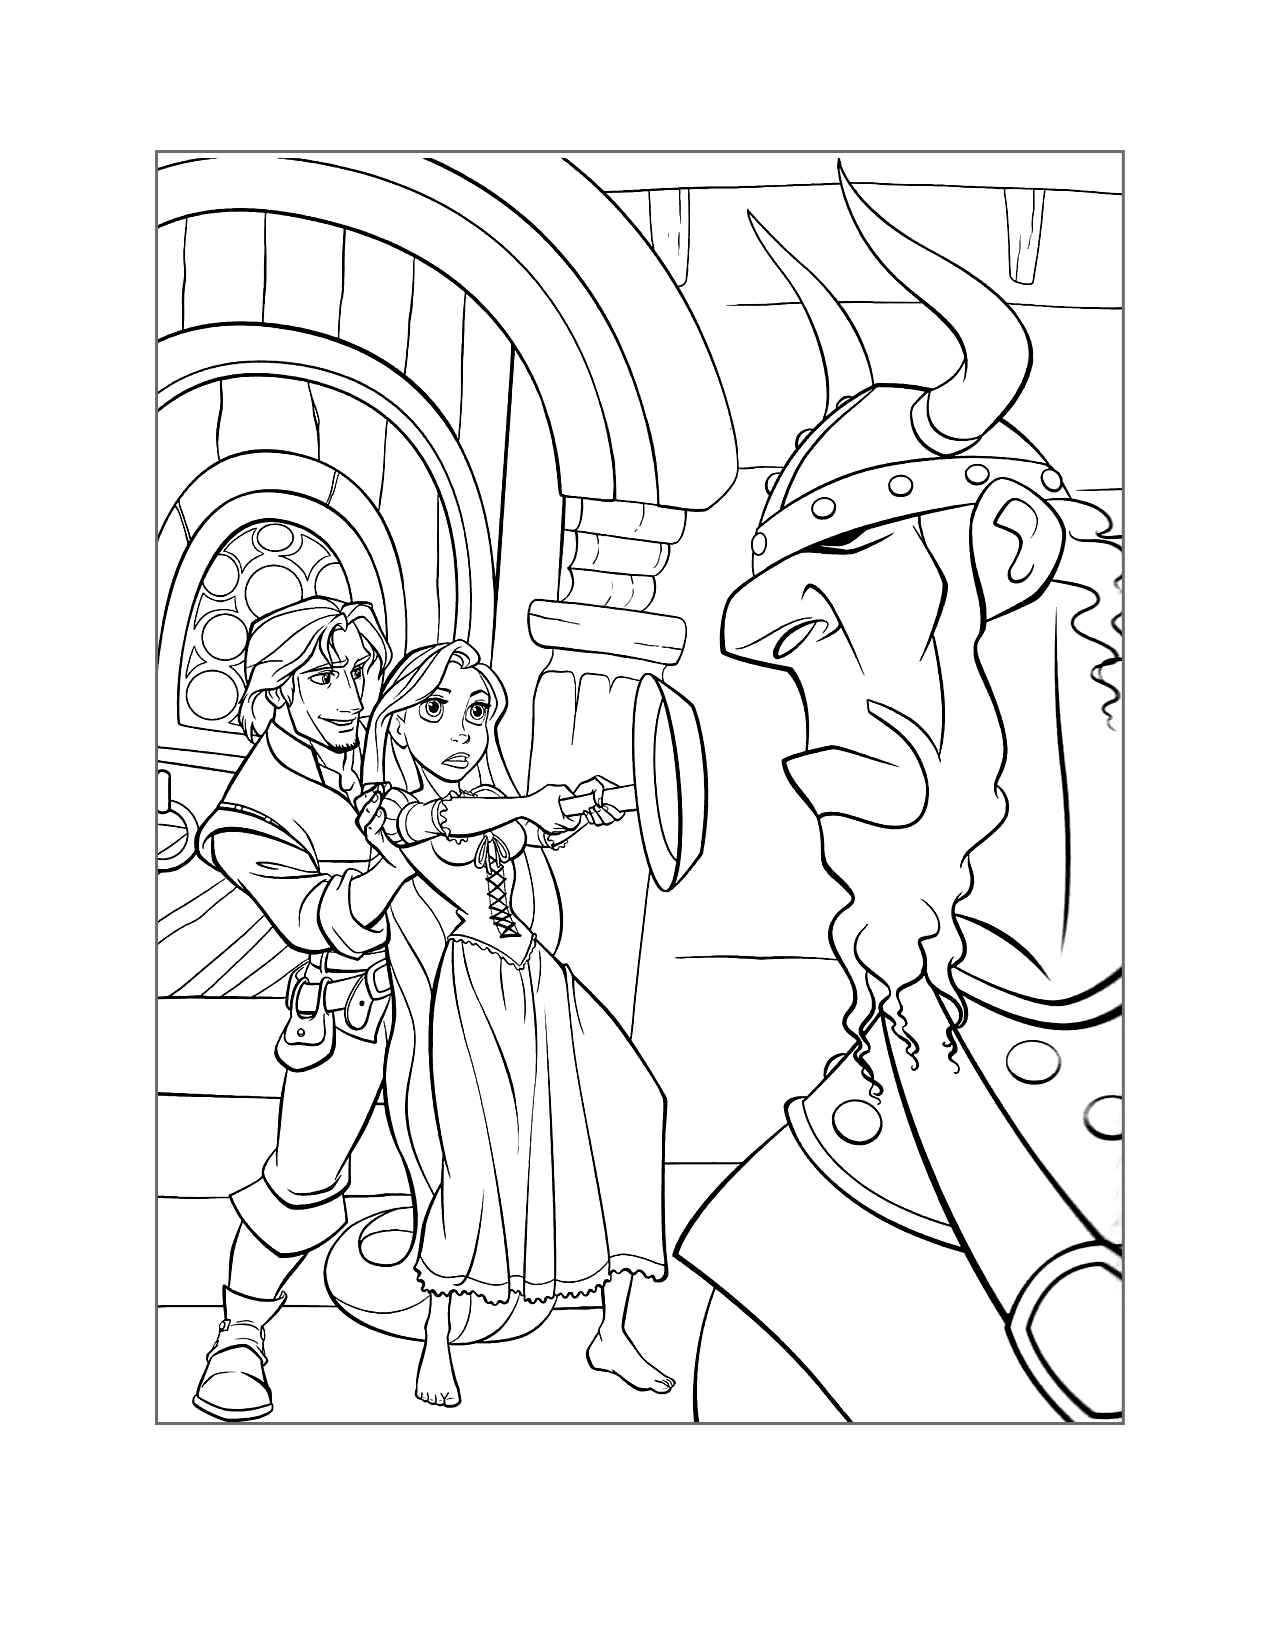 Rapunzel Fighting With Frying Pan Tangled Coloring Page